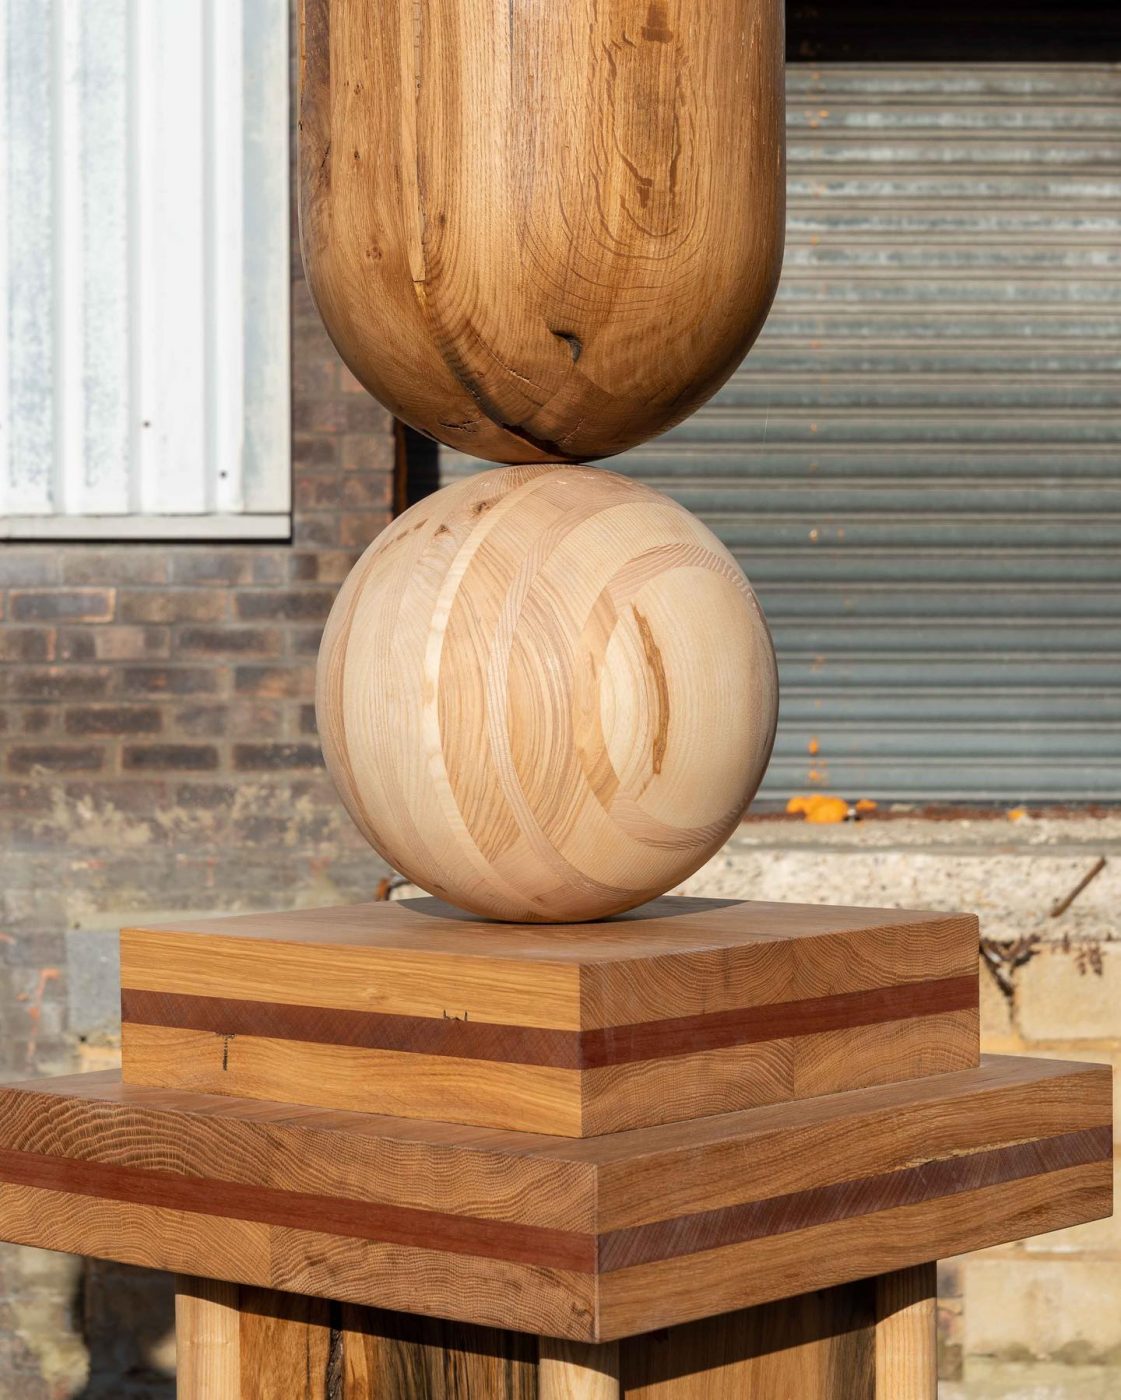 sculptural-totems.-laminated-layered.-and-precisely-balanced-using-reclaimed-oak-from-old-lock-gates